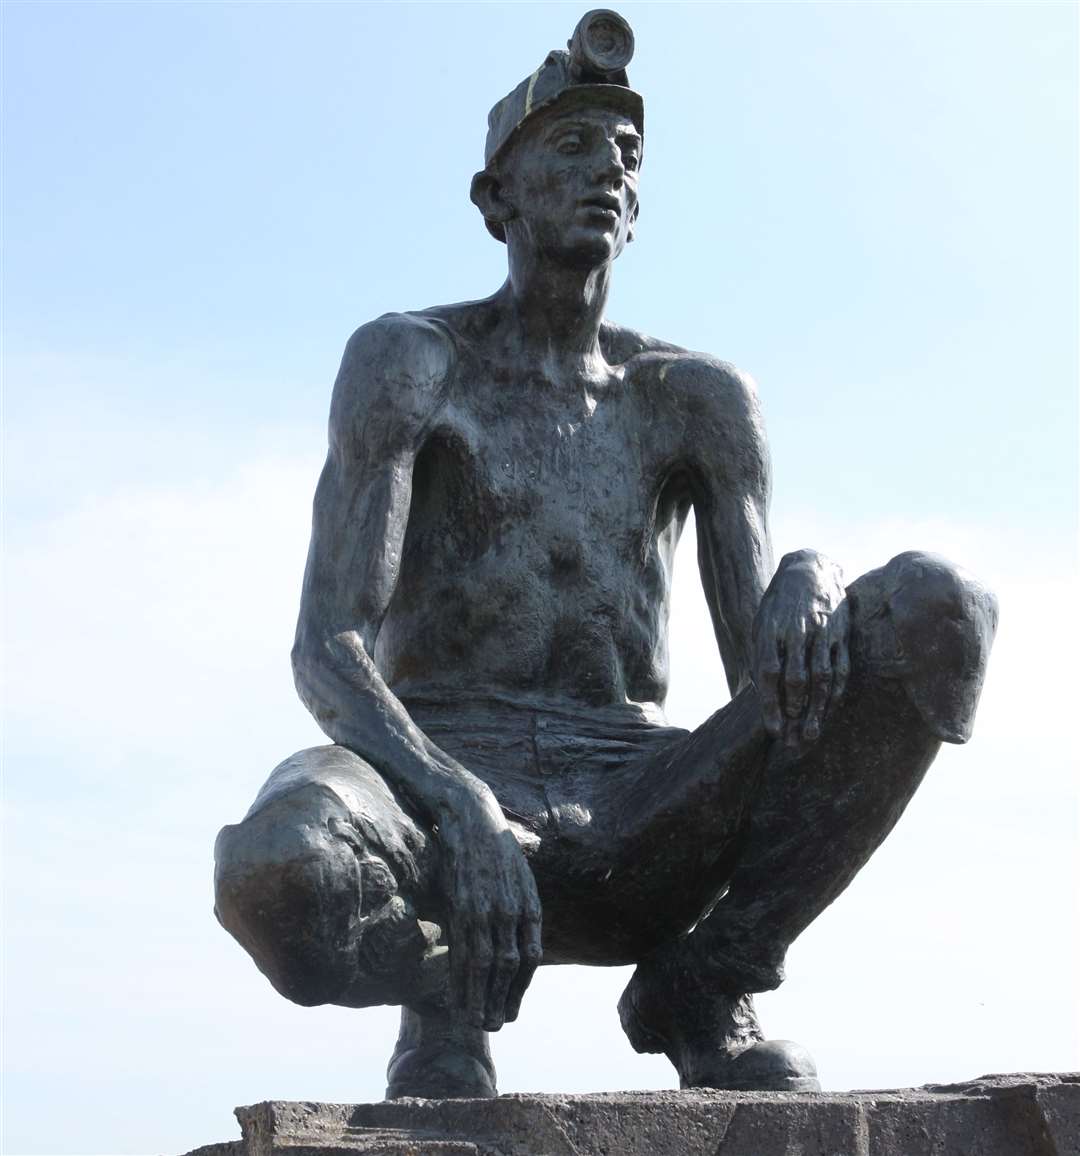 The statue has been at Betteshanger for 13 years. Picture: Terry Scott for KMG